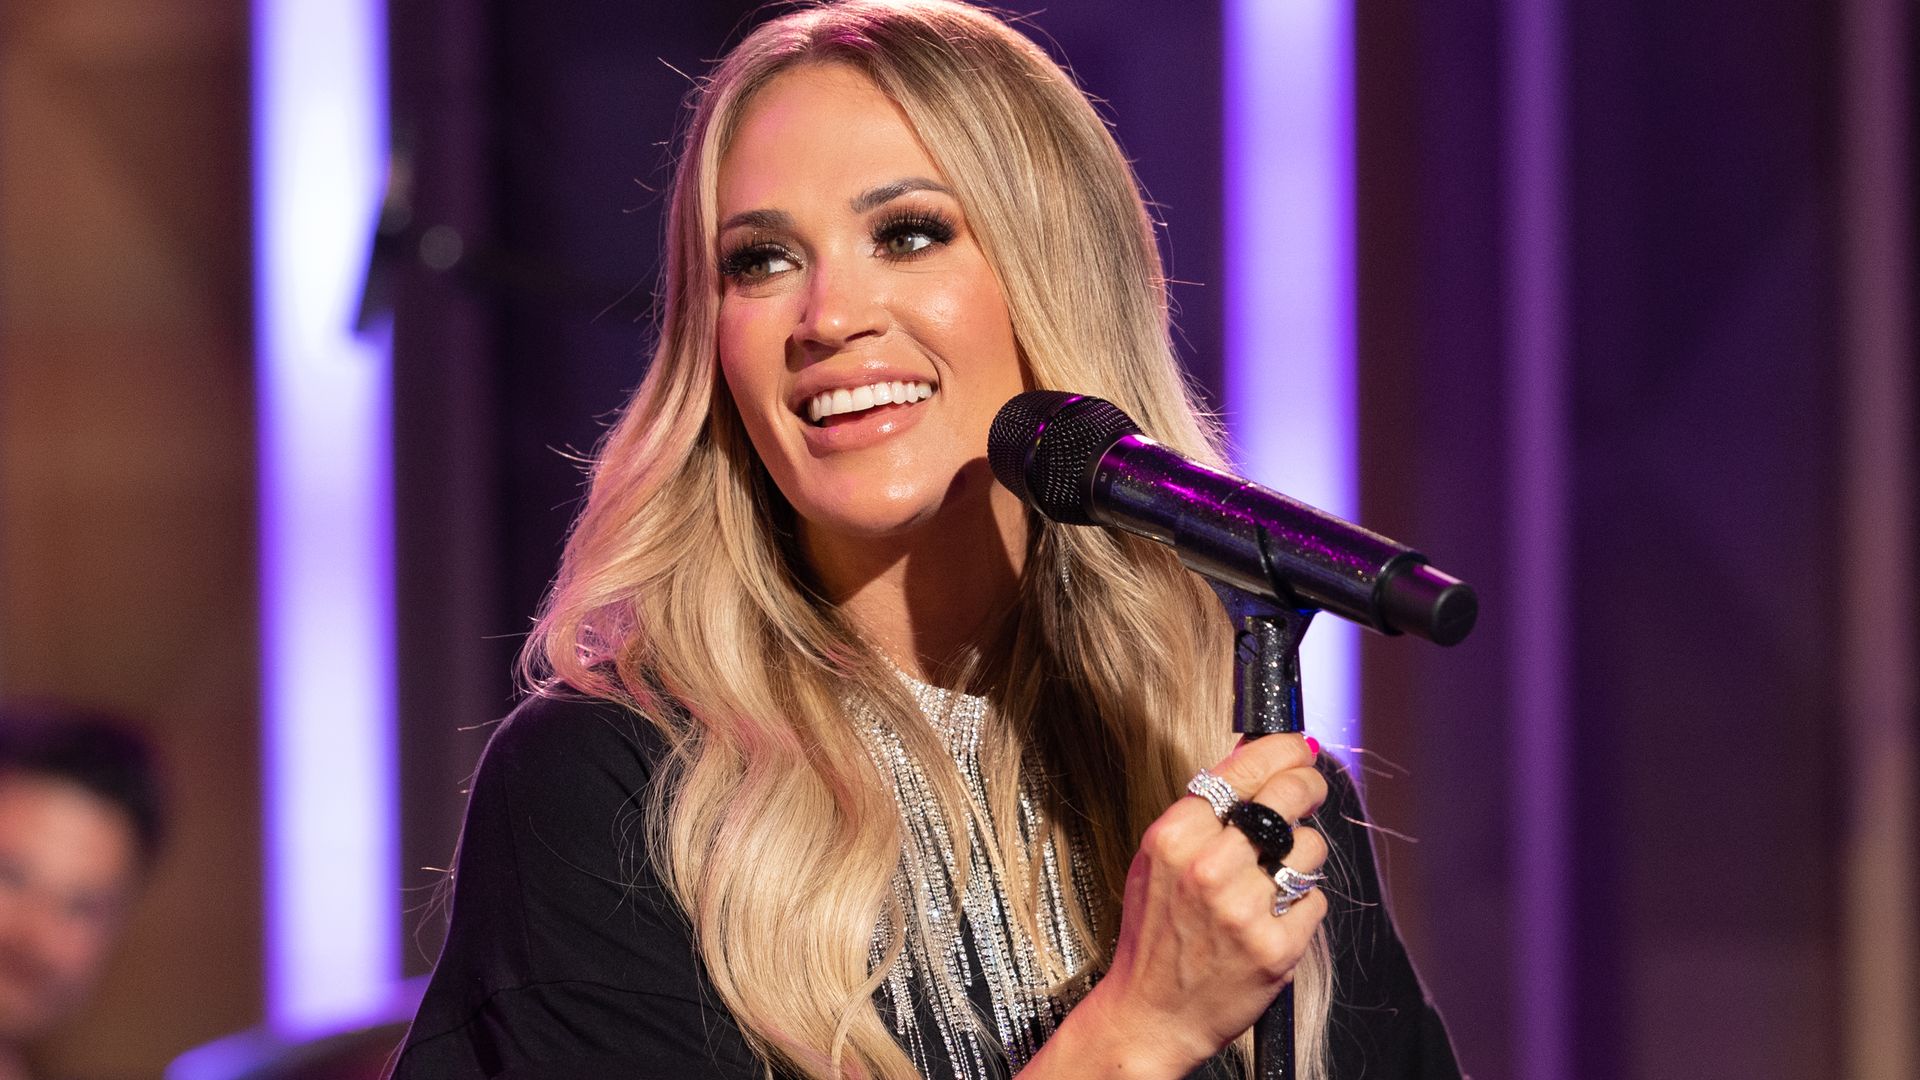 Carrie Underwood smiling while looking to the left, she is standing with a mic stand in front of her